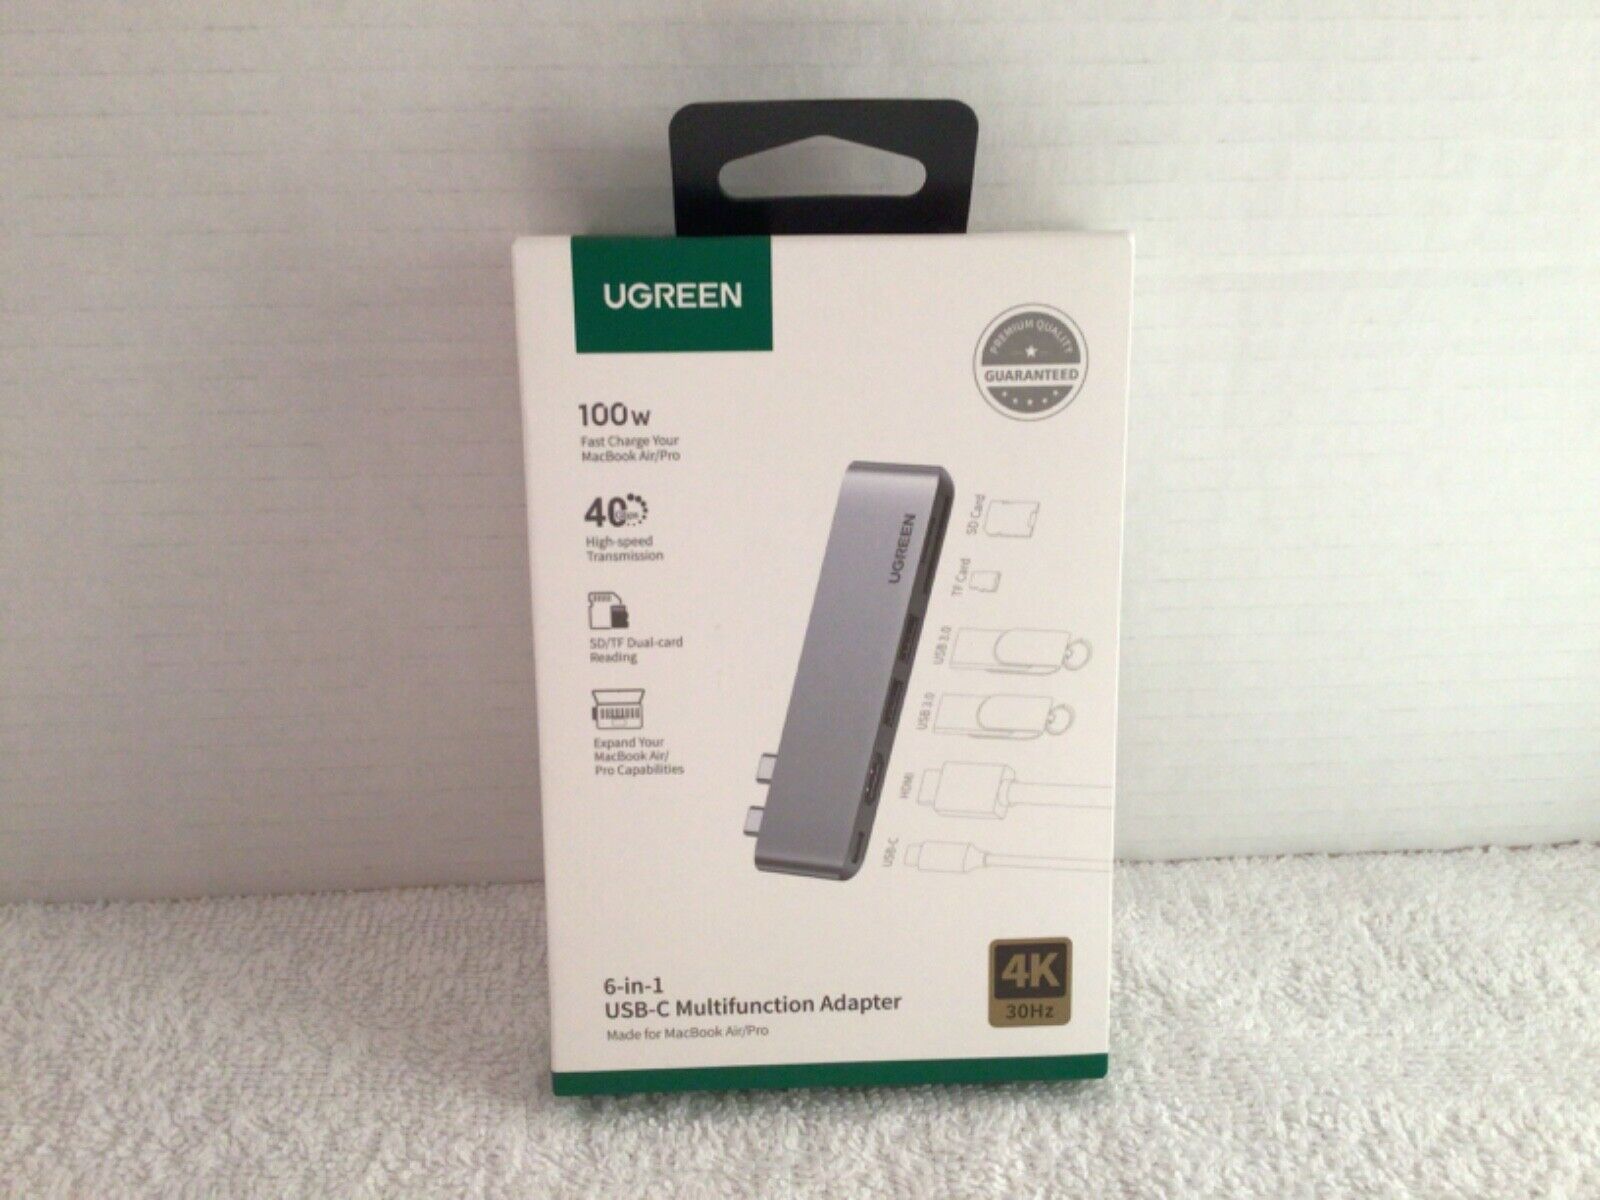 UGREEN 100w 6-in-1 USB-C Multifunction Adapter For MacBook Air/Pro